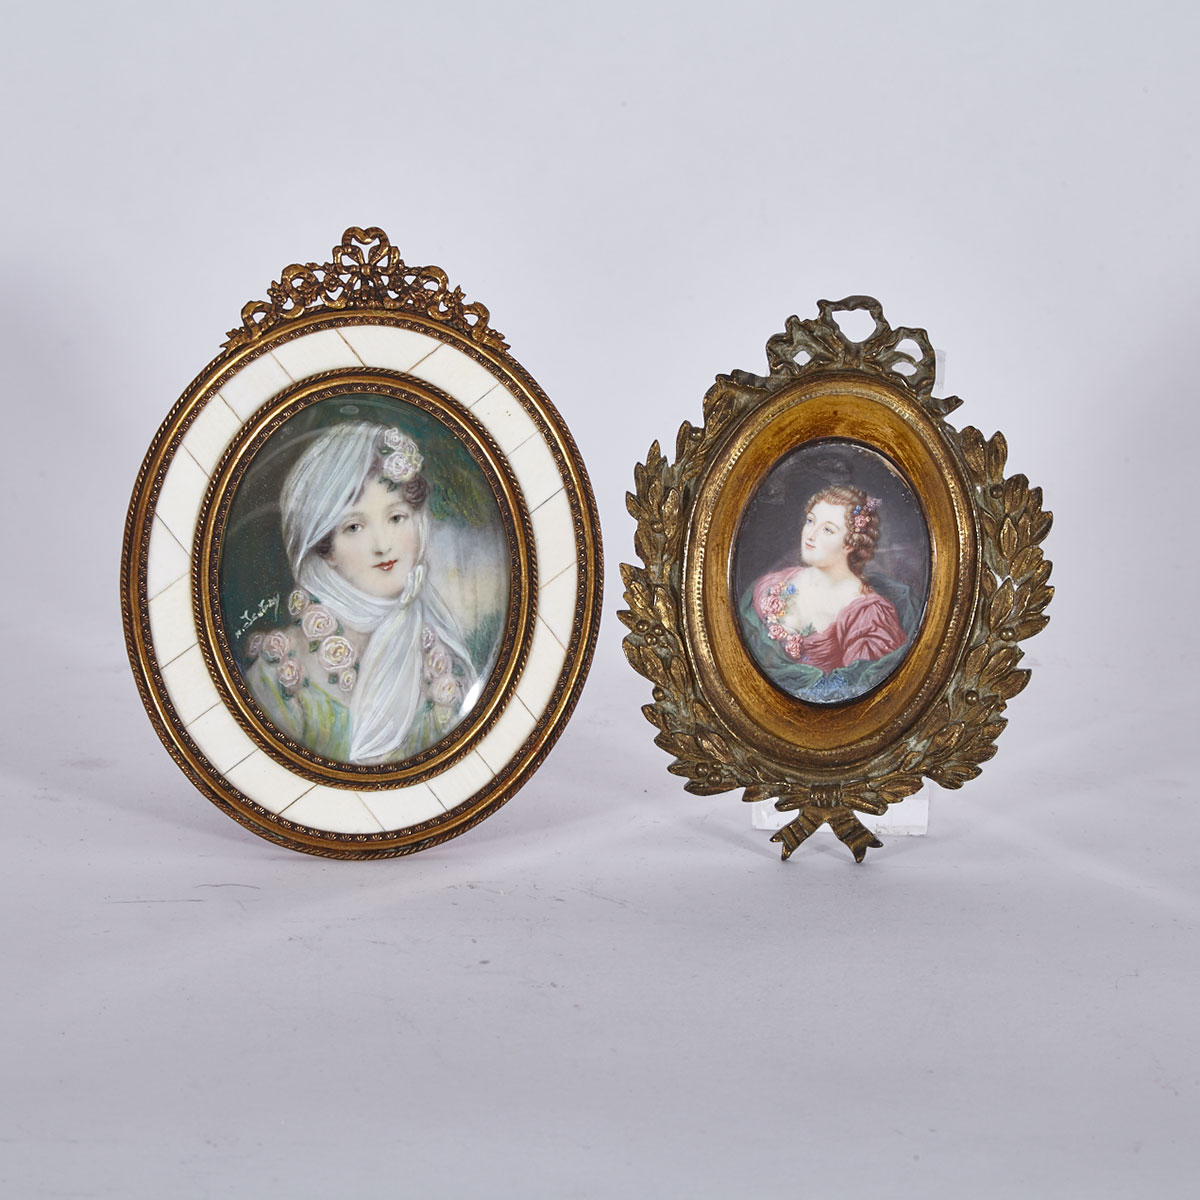 Two French School Portrait Miniatures on Ivory, 19th century